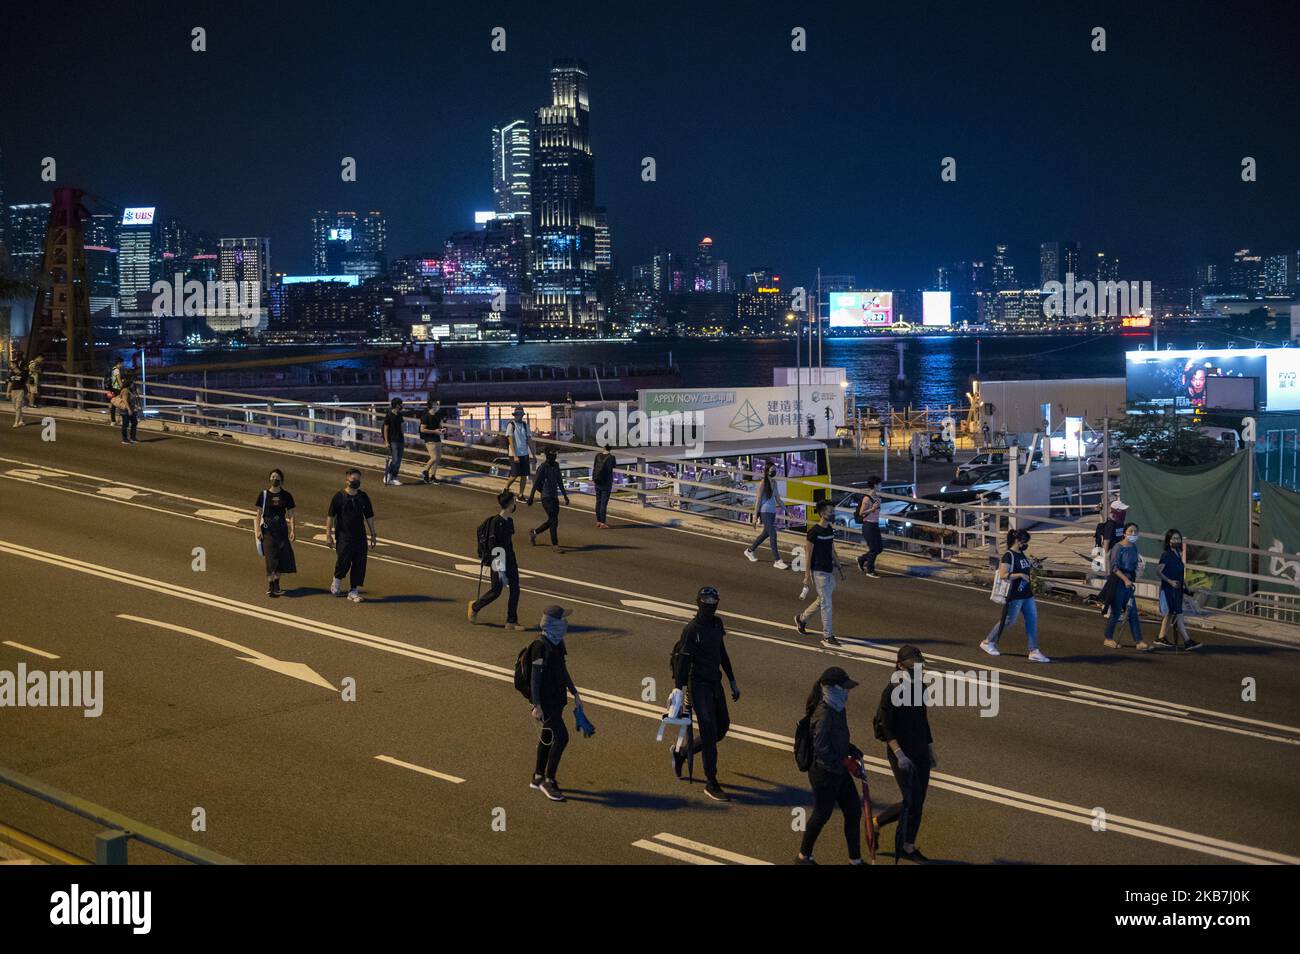 Protesters are seen walking on a road in Hong Kong on October 4, 2019, Hong Kong invoked emergency powers for the first time in more than half a century to ban face masks for protesters after months of unrest, prompting demonstrators to occupy downtown streets and forcing the metro operator to shut down all services late Friday. (Photo by Vernon Yuen/NurPhoto) Stock Photo